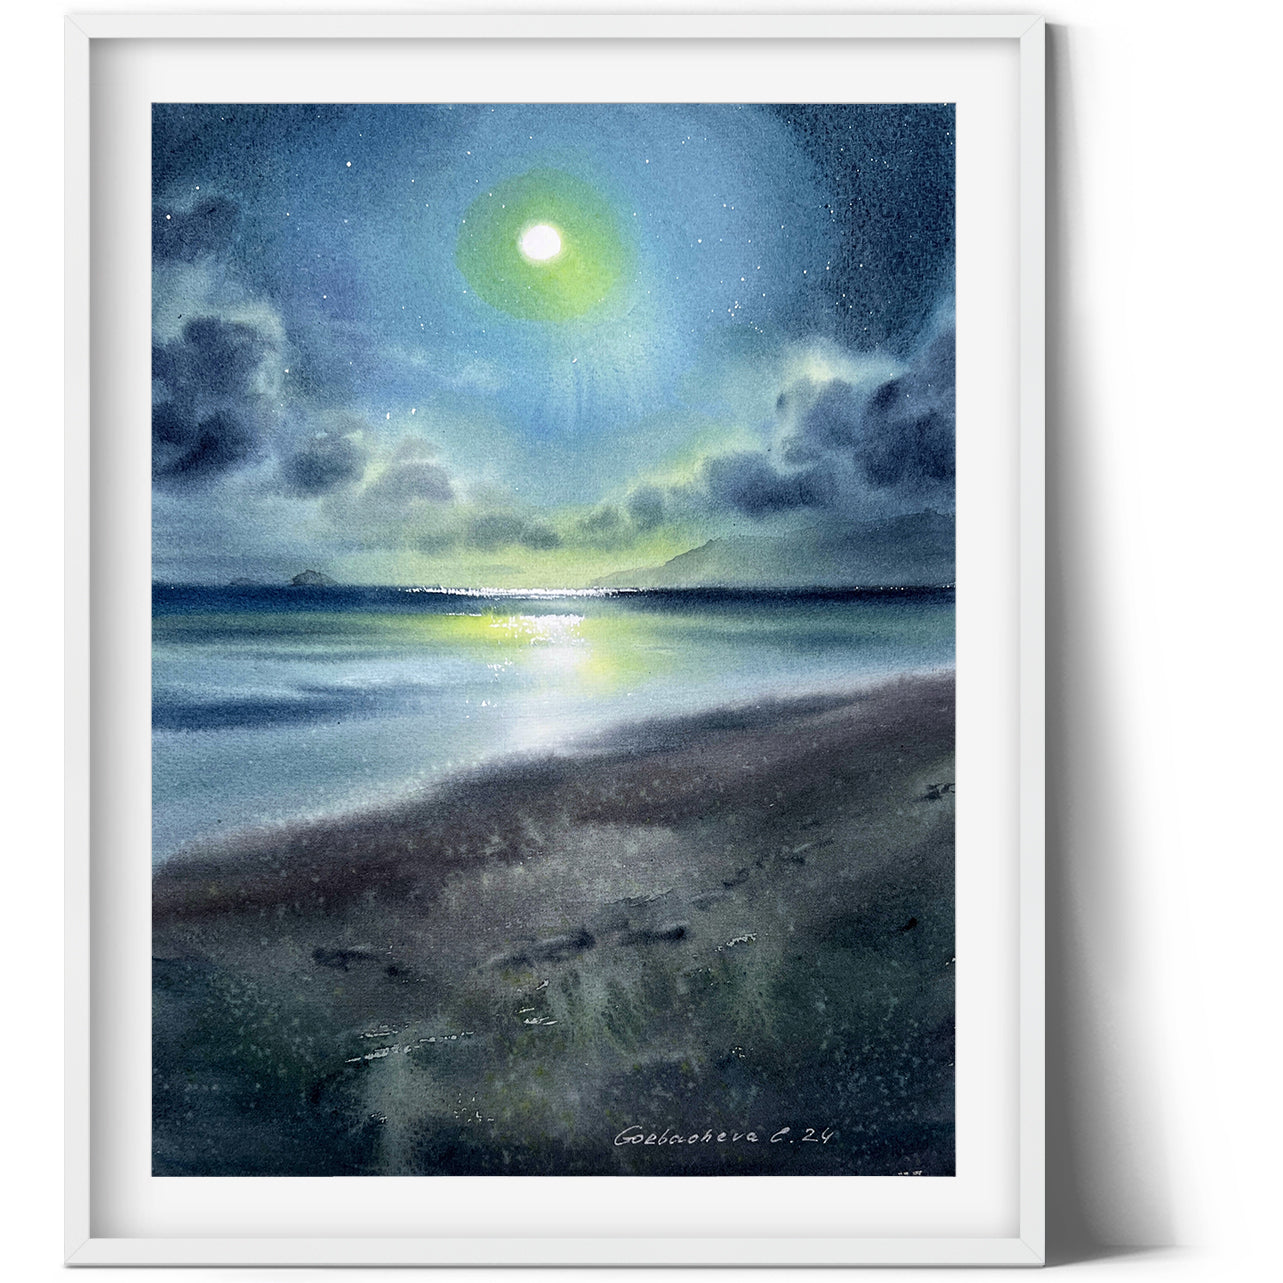 Nautical Wall Art 'In the Moonlight #8' Hand-Painted Seascape, 9x12 Ocean Scene for Coastal Decor, Art Collectors Gift Idea